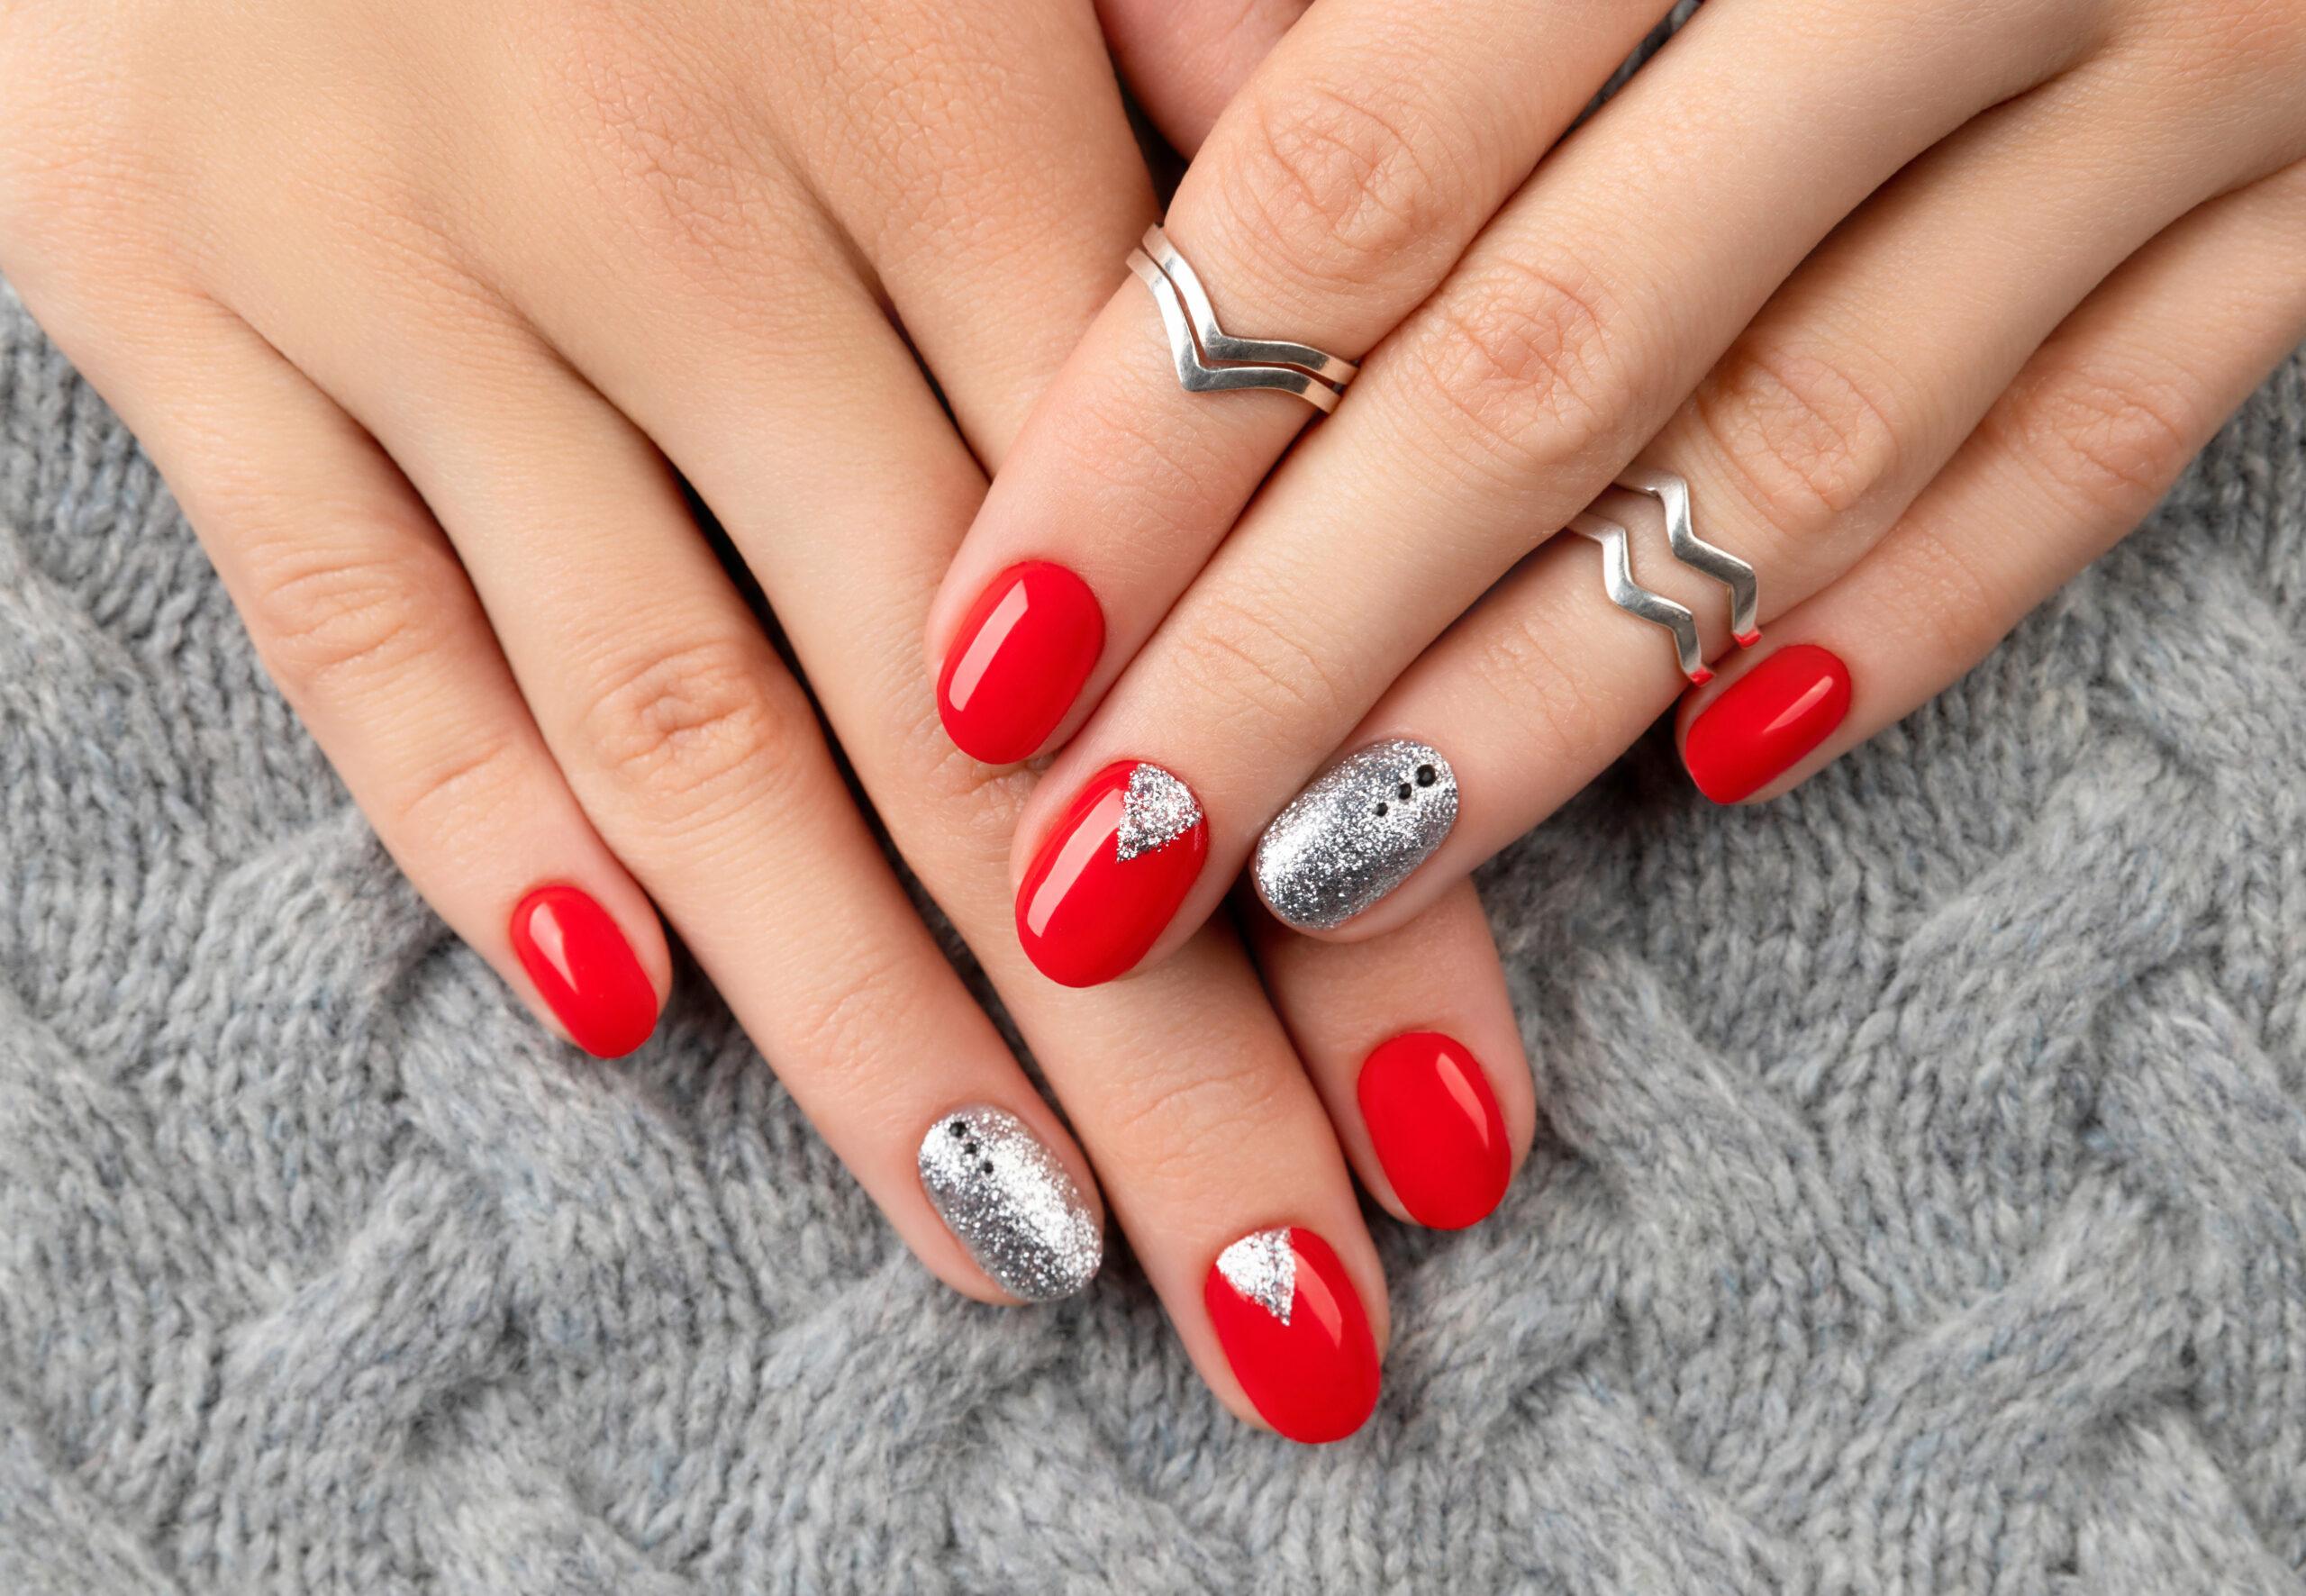 Woman's hands with fashionable red manicure. Christmas new year nail design. Manicure, pedicure beauty salon concept.